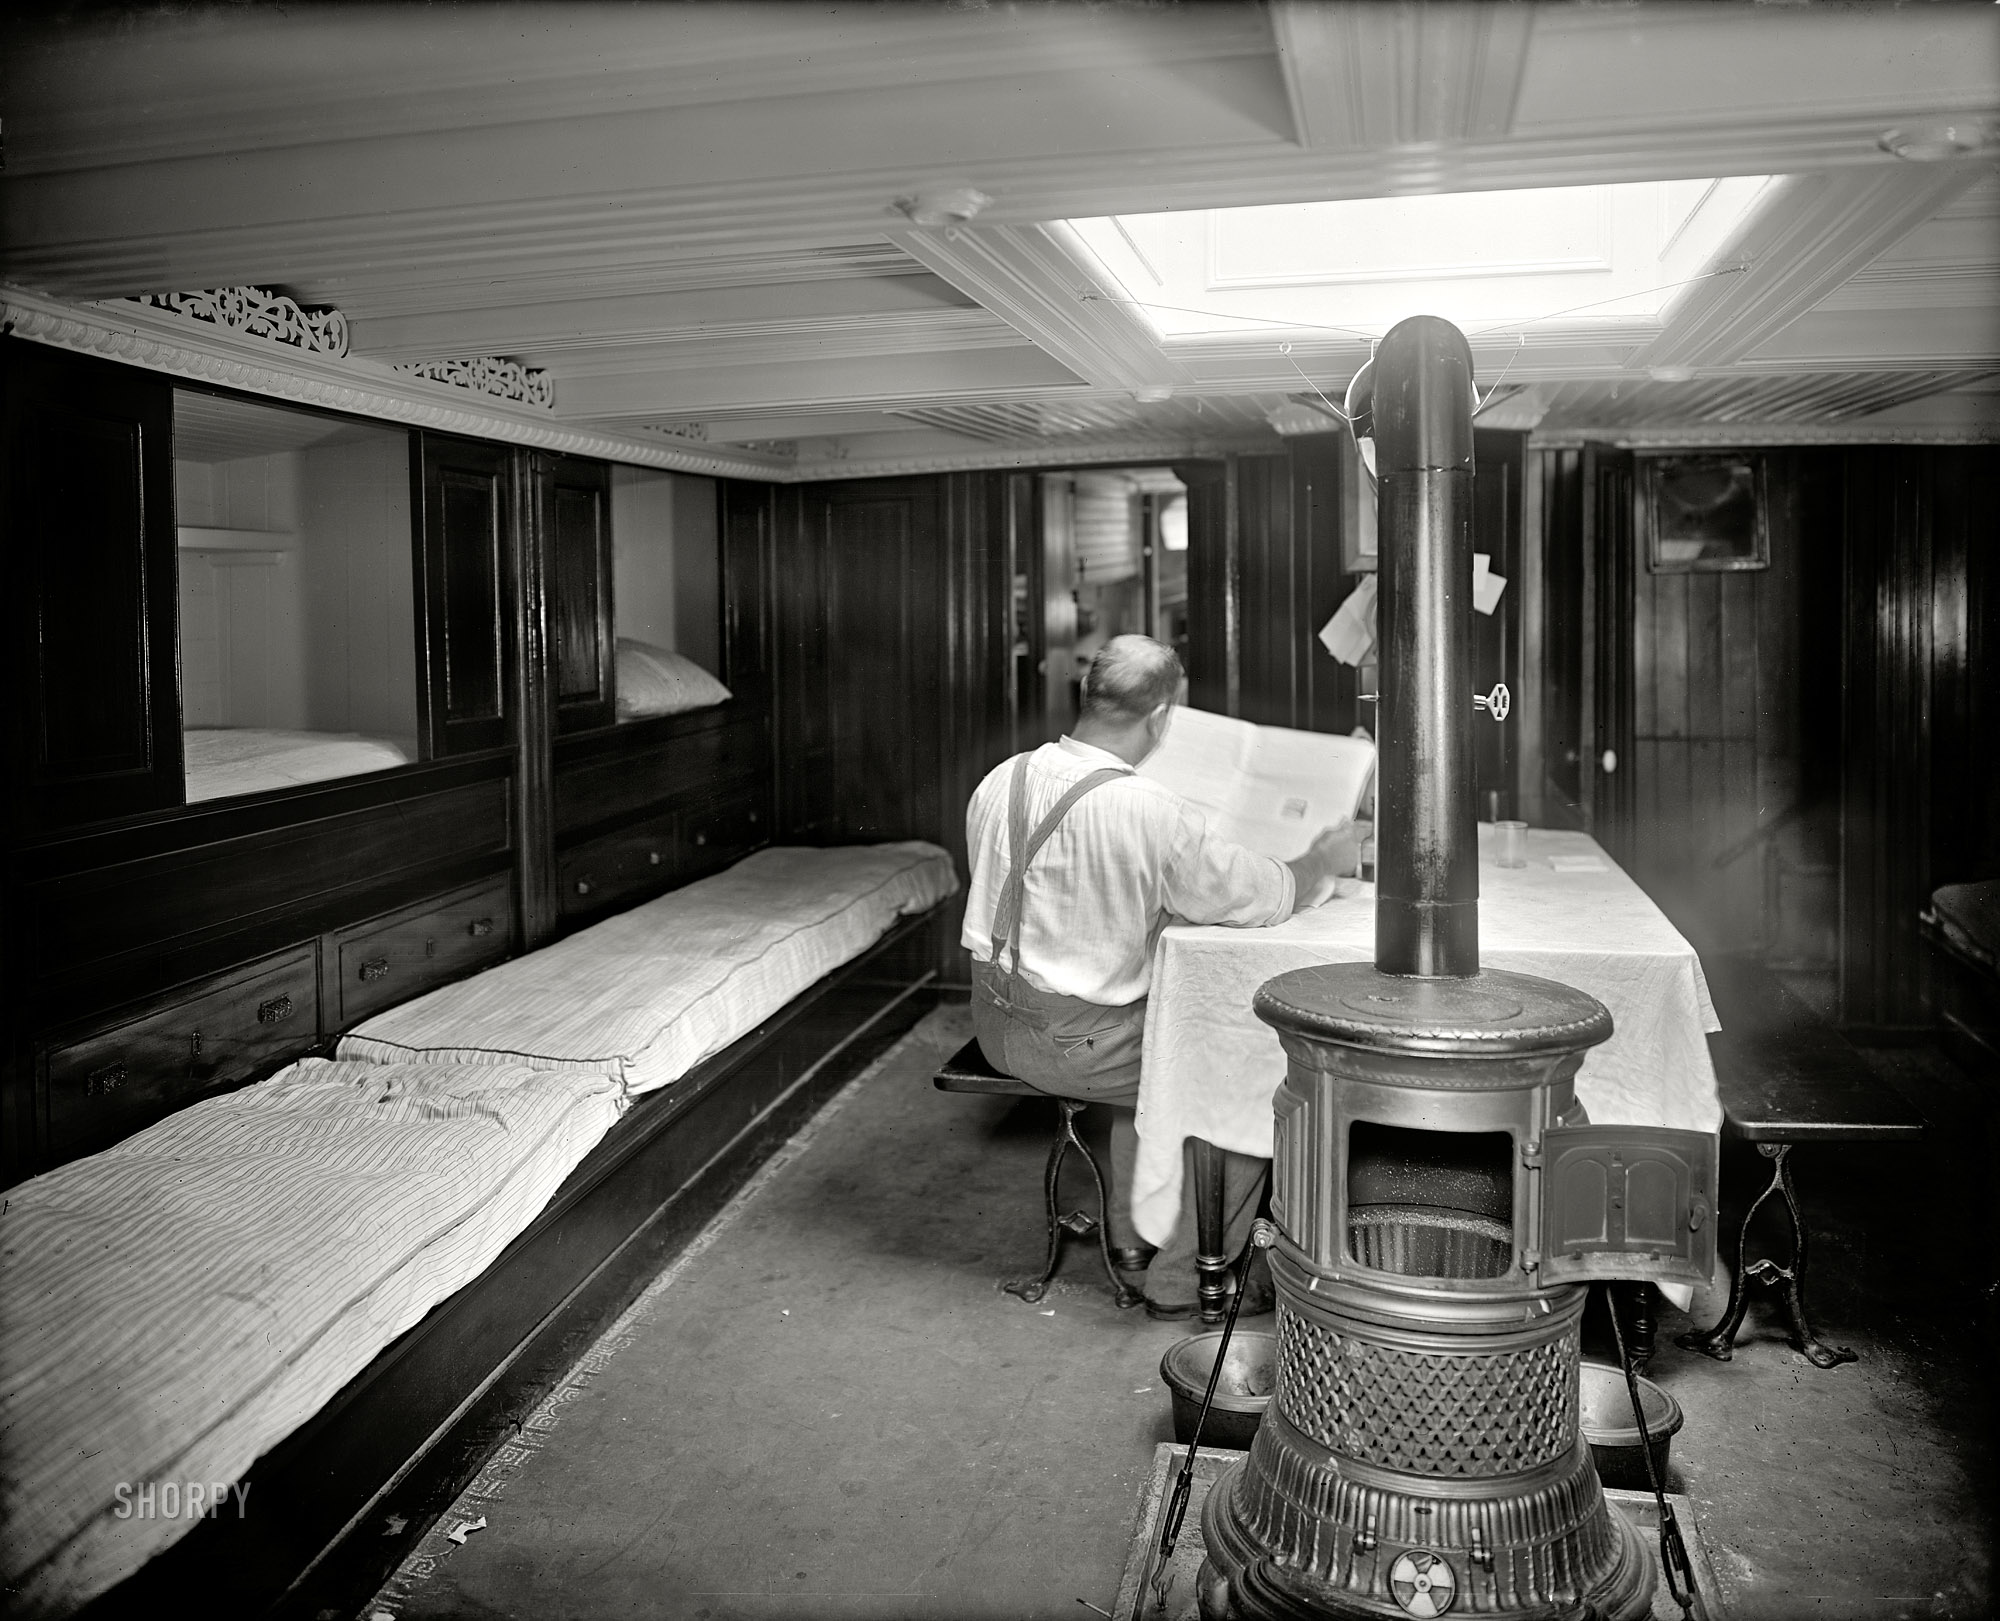 Circa 1900. "Cabin of pilot boat No.2, New York." 8x10 inch dry plate glass negative, Detroit Publishing Company. View full size.